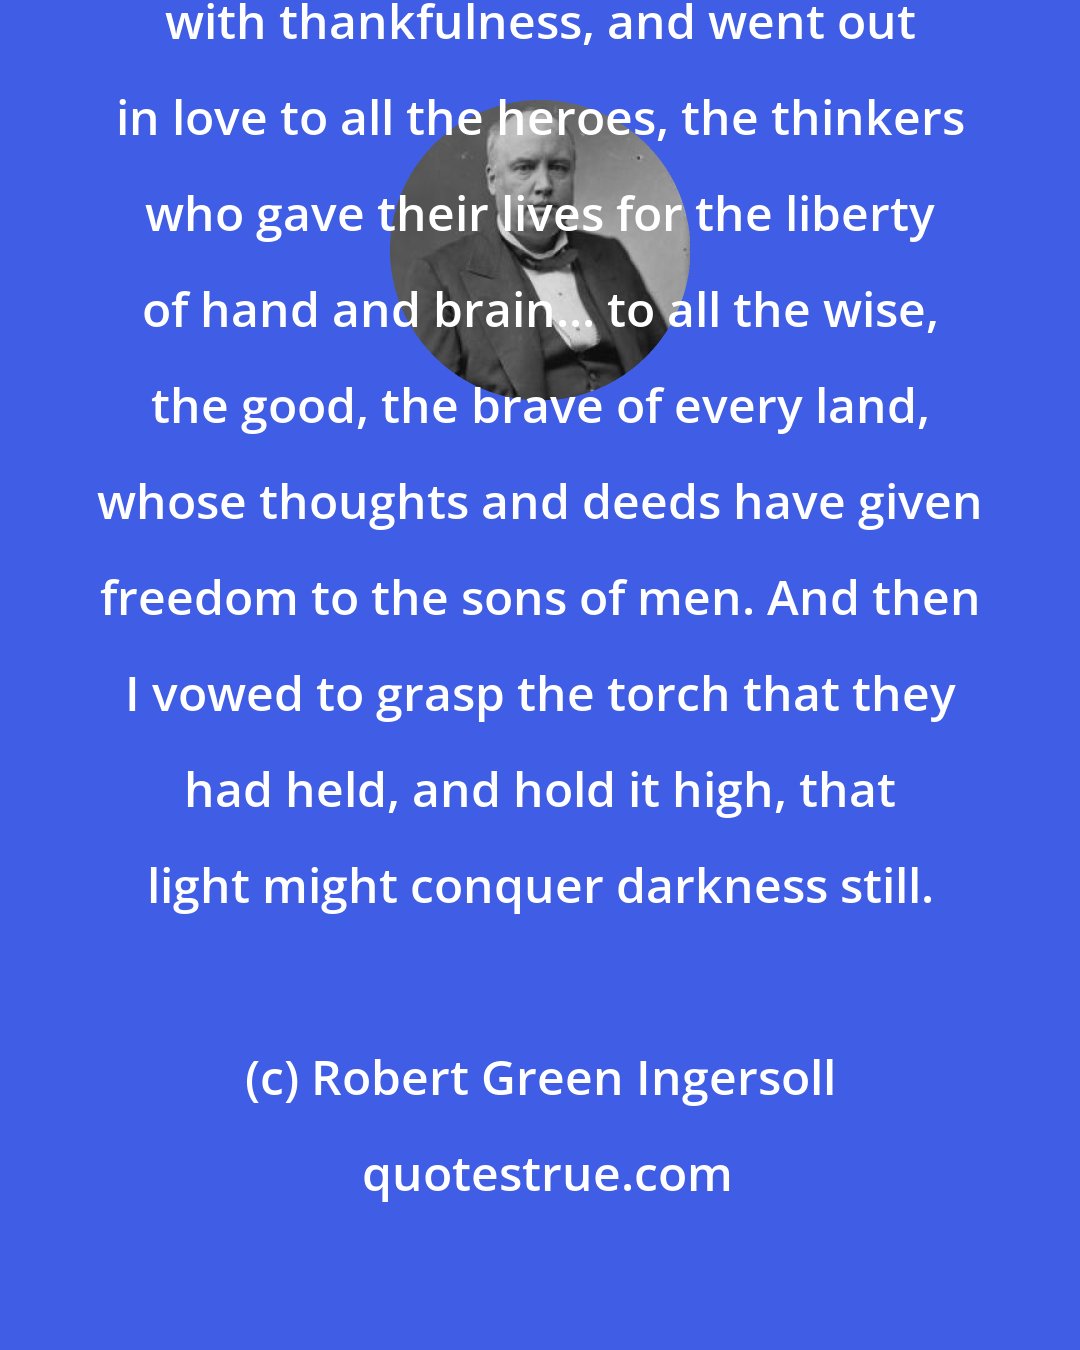 Robert Green Ingersoll: My heart was filled with gratitude, with thankfulness, and went out in love to all the heroes, the thinkers who gave their lives for the liberty of hand and brain... to all the wise, the good, the brave of every land, whose thoughts and deeds have given freedom to the sons of men. And then I vowed to grasp the torch that they had held, and hold it high, that light might conquer darkness still.